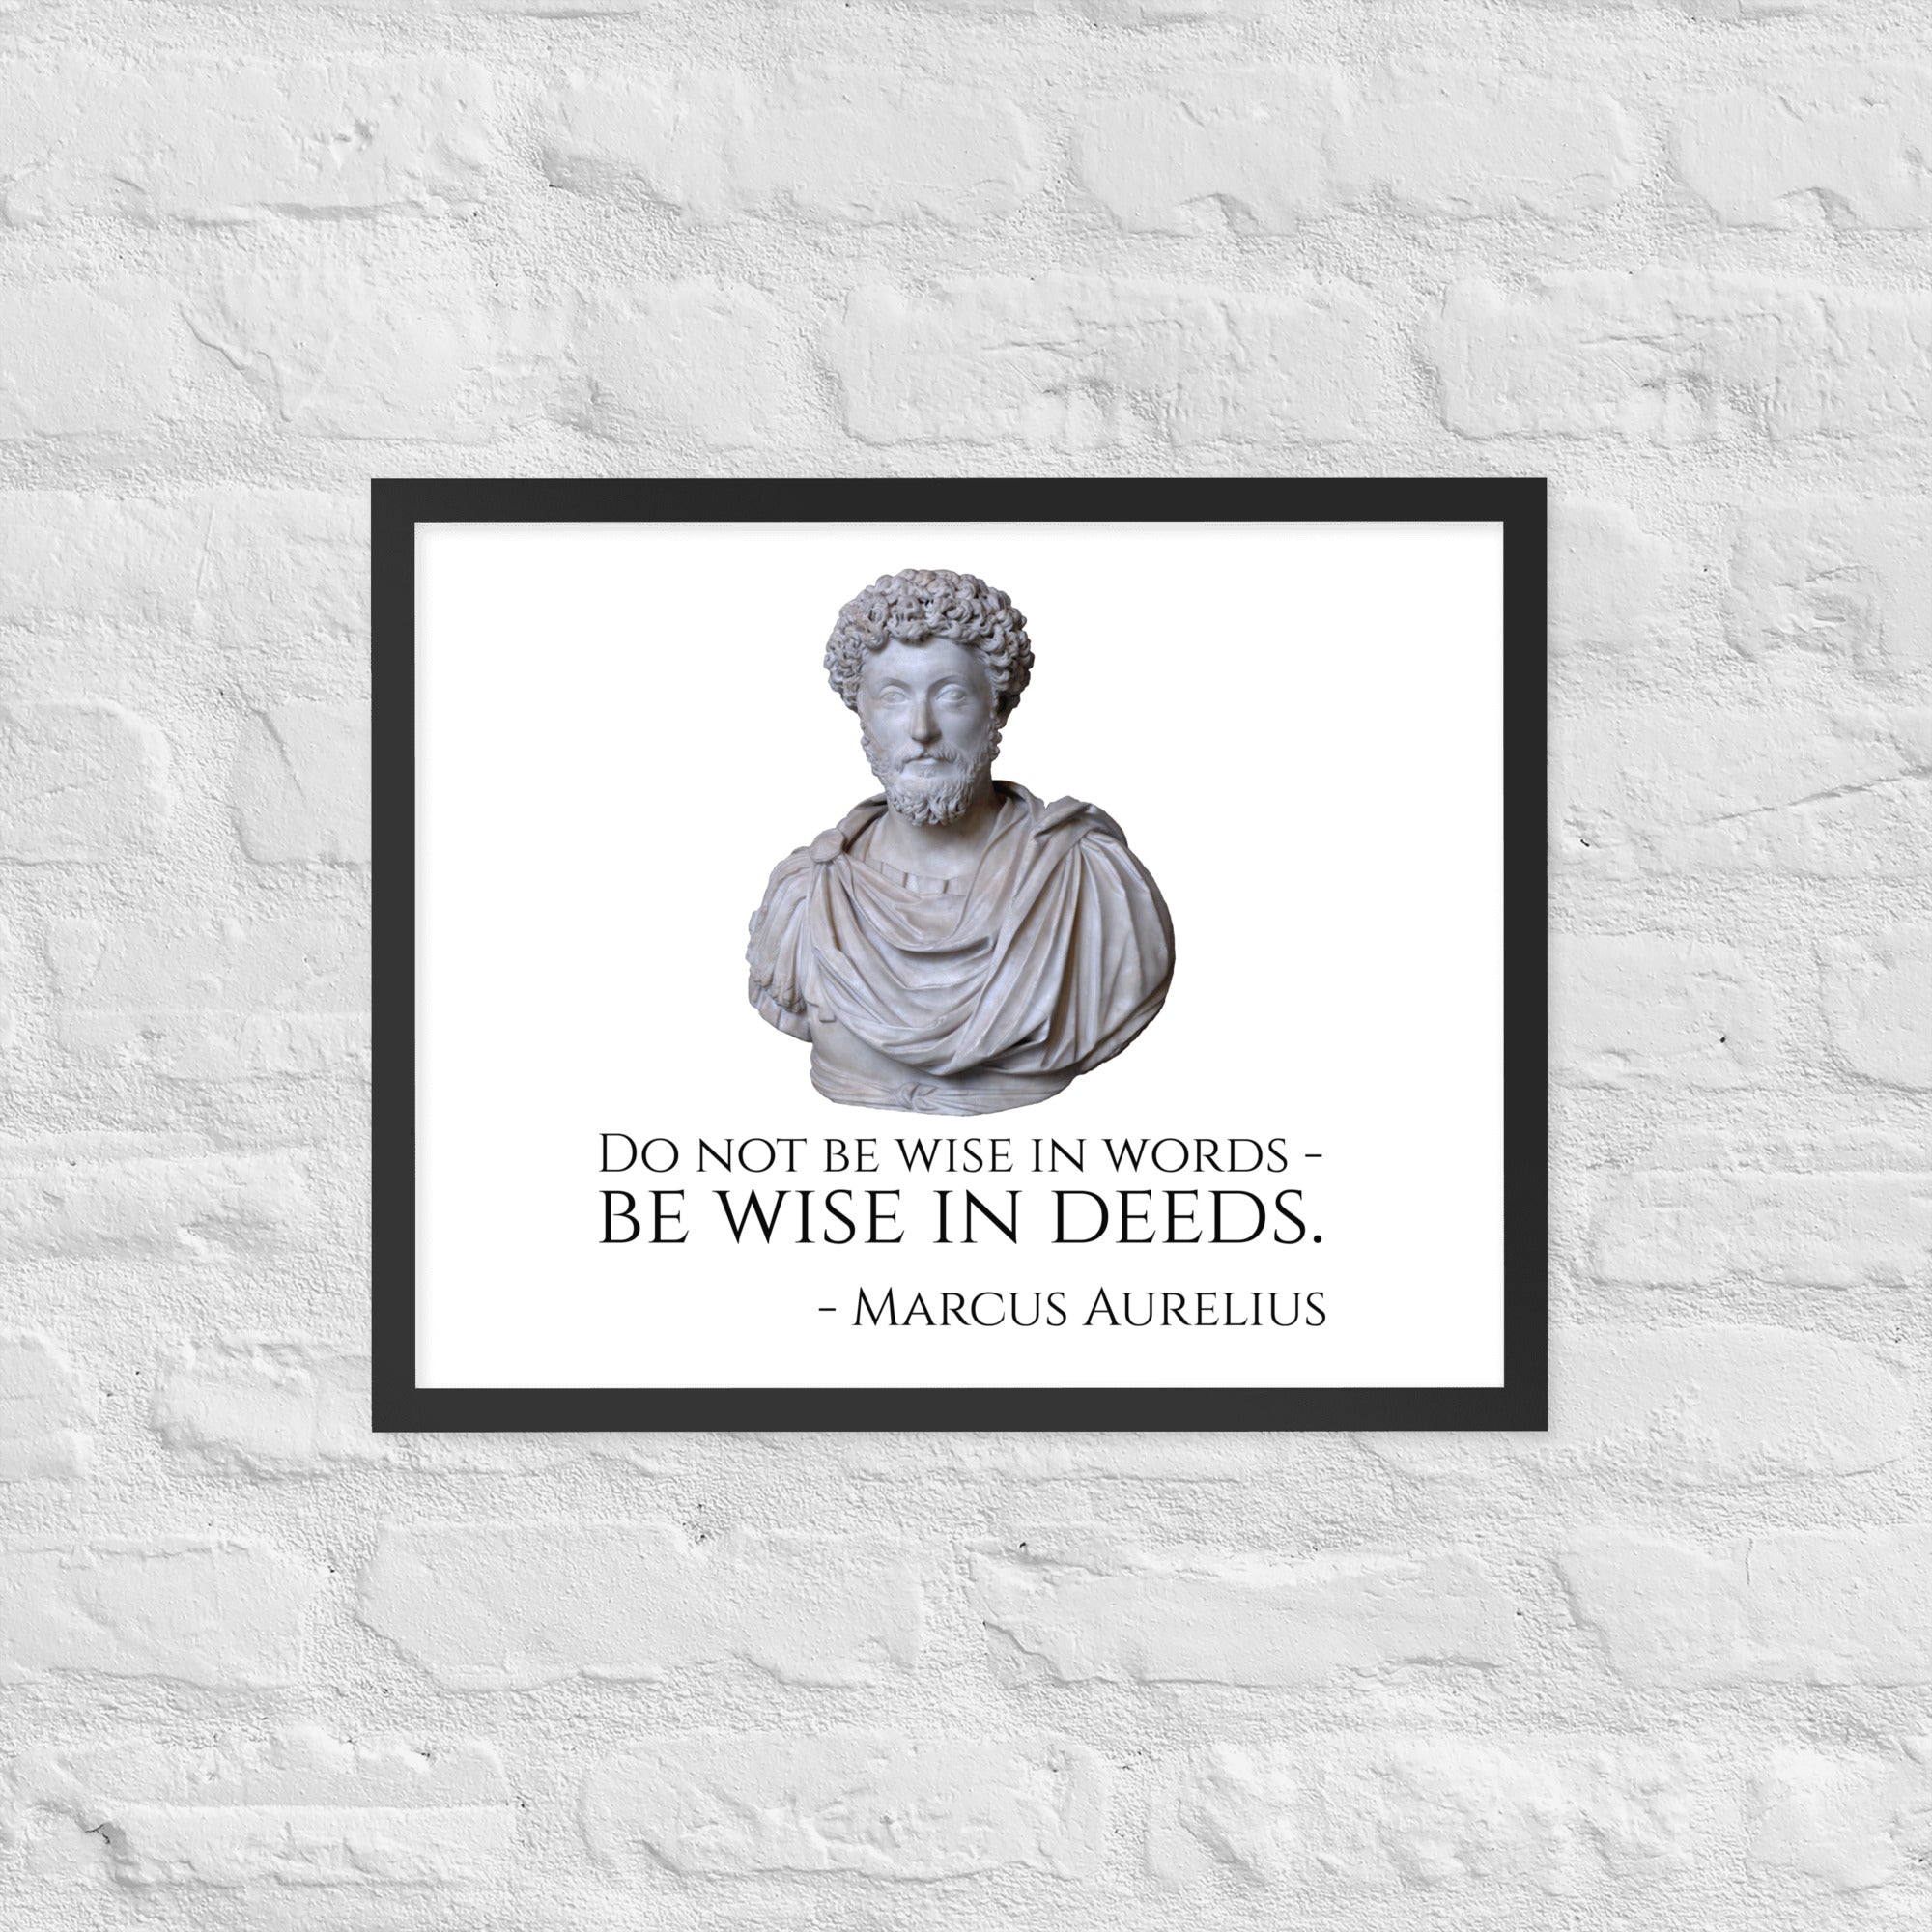 Do Not Be Wise In Words - Be Wise In Deeds. - Marcus Aurelius - Stoic Philosophy Framed poster